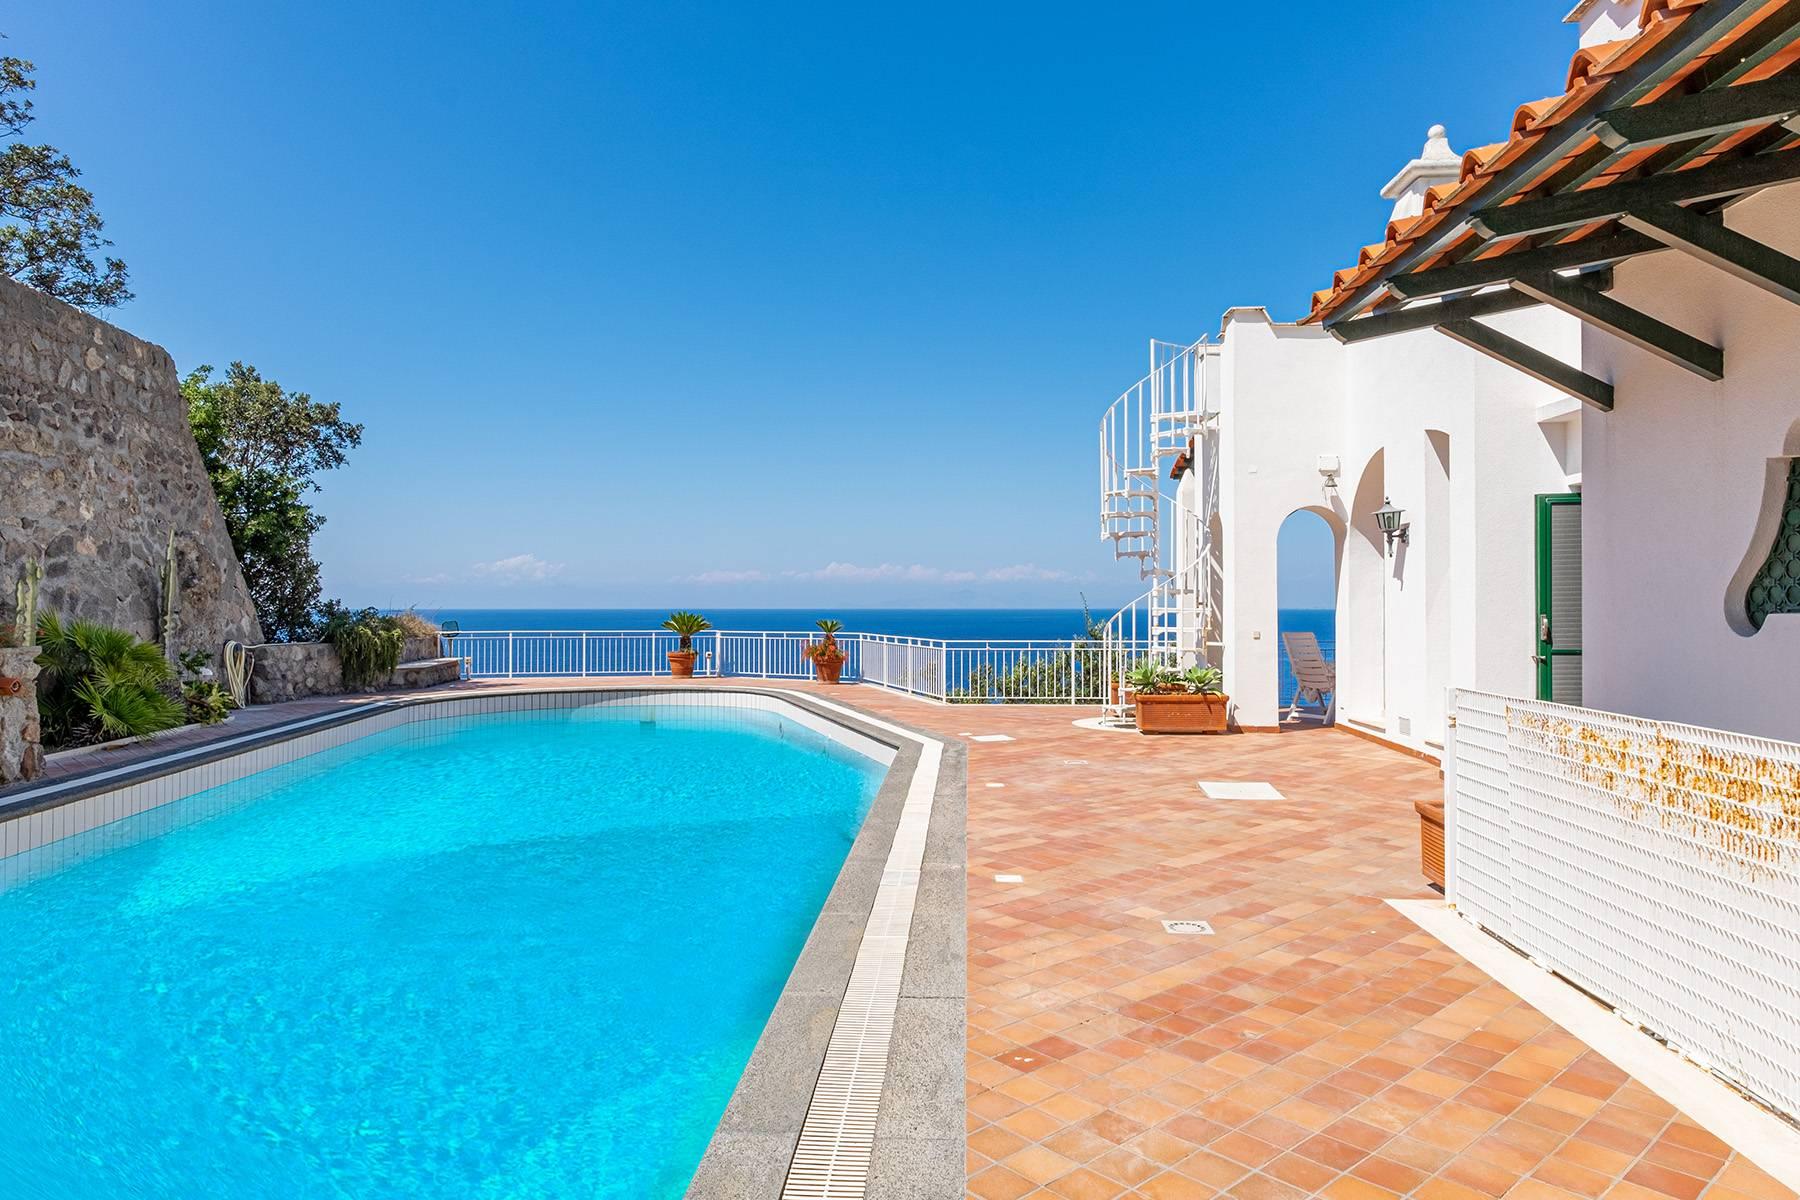 Mediterranean Villa pied dans l'eau with pool and private access to the sea - 9